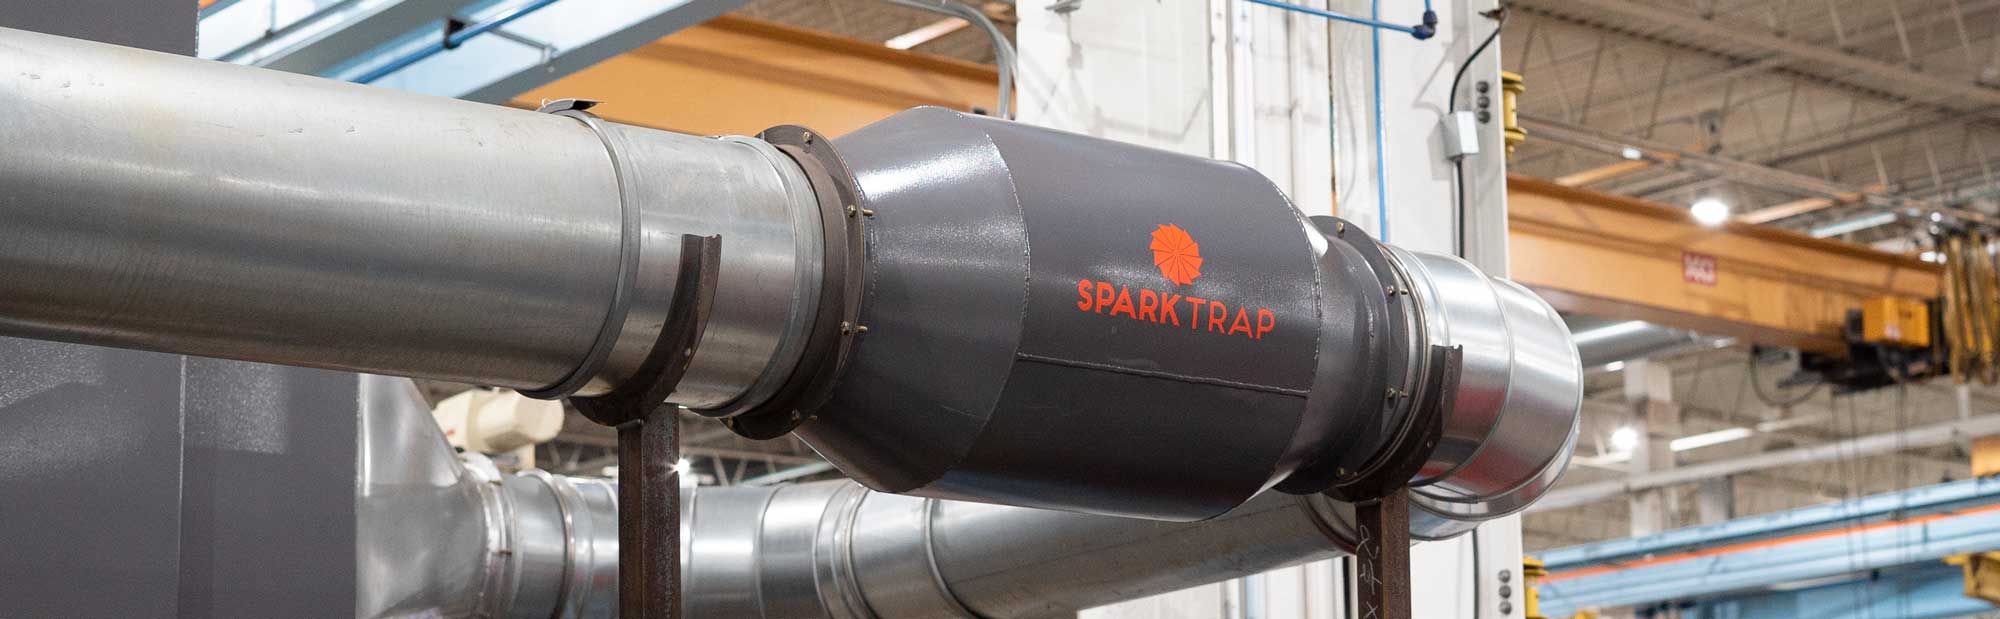 Another photo of the Spark Trap spark arrestor installed in ductwork